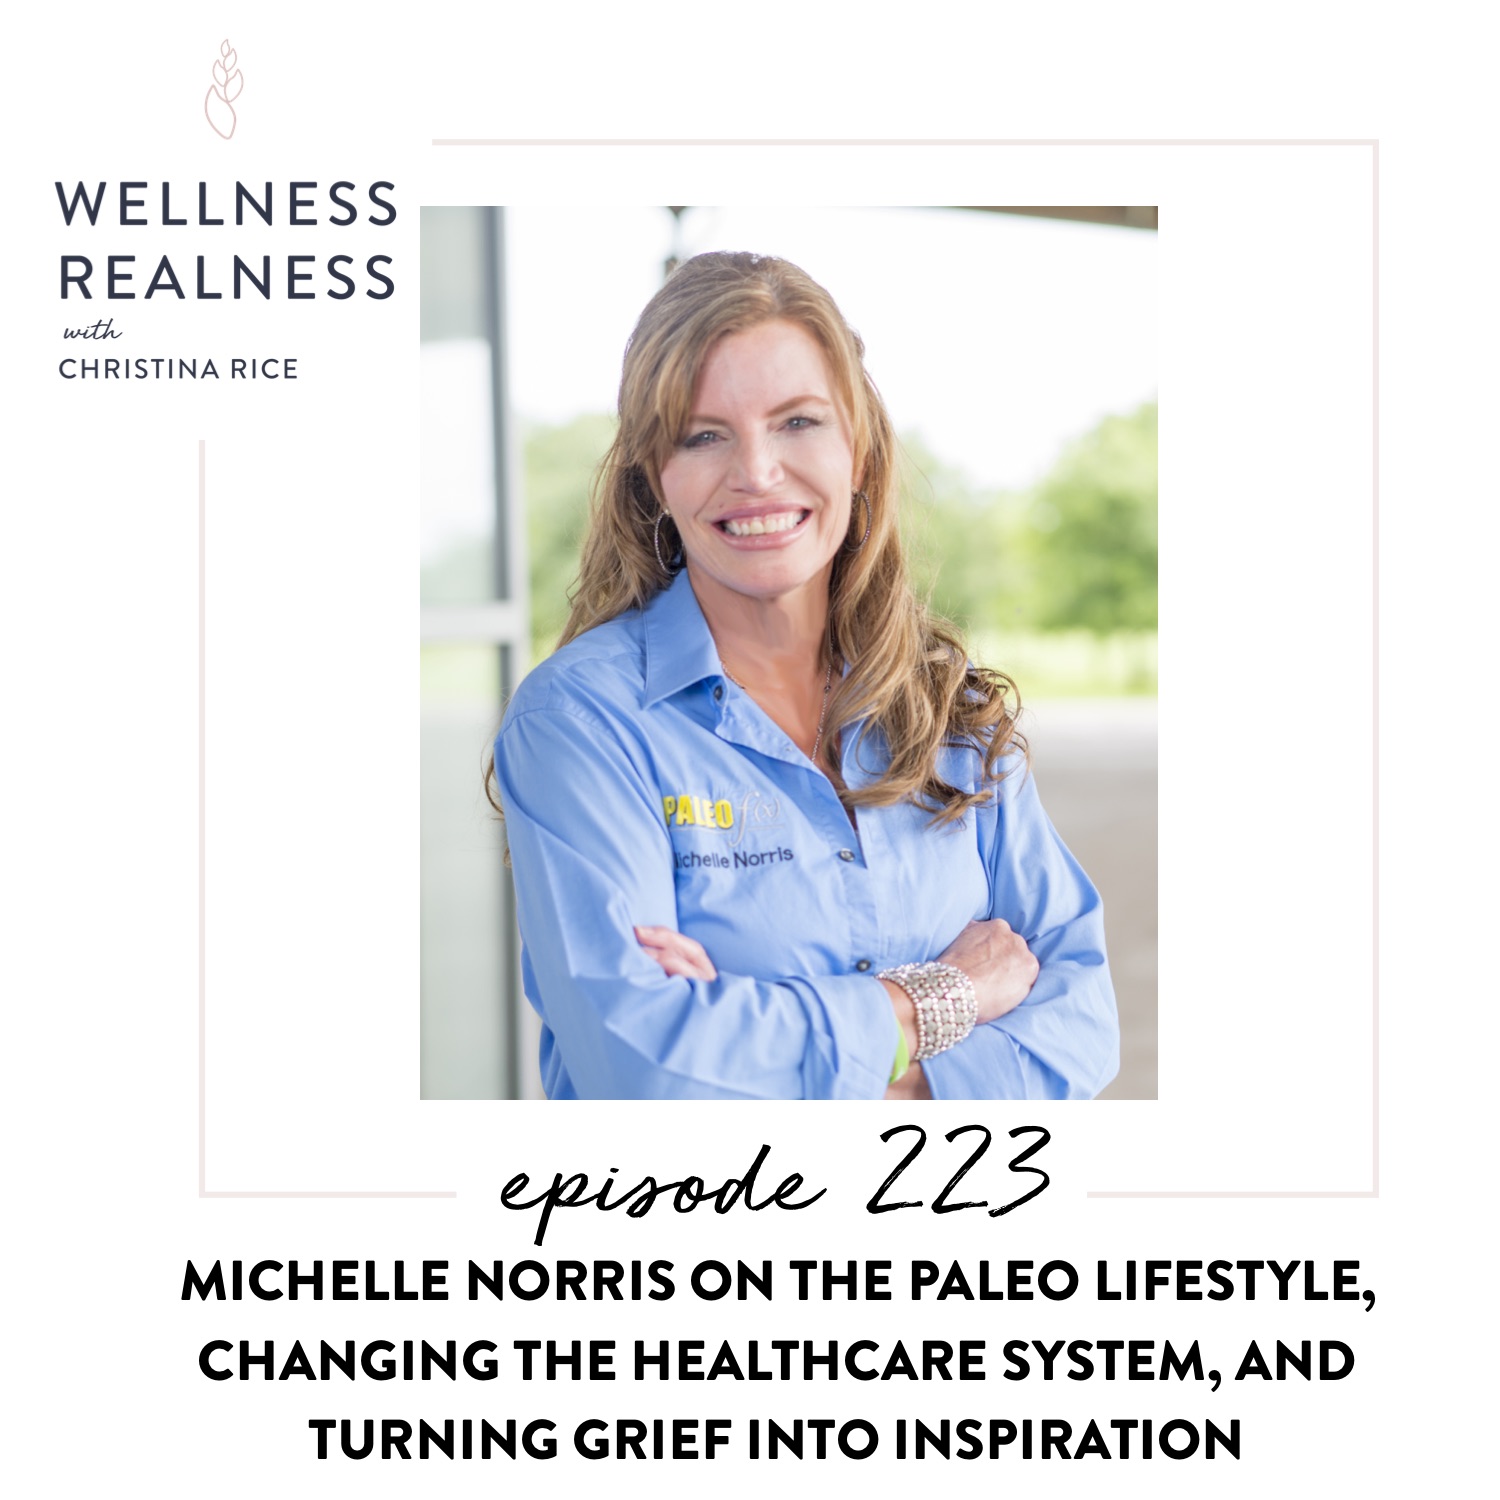 223: Michelle Norris on the Paleo Lifestyle, Changing the Healthcare System, and Turning Grief into Inspiration